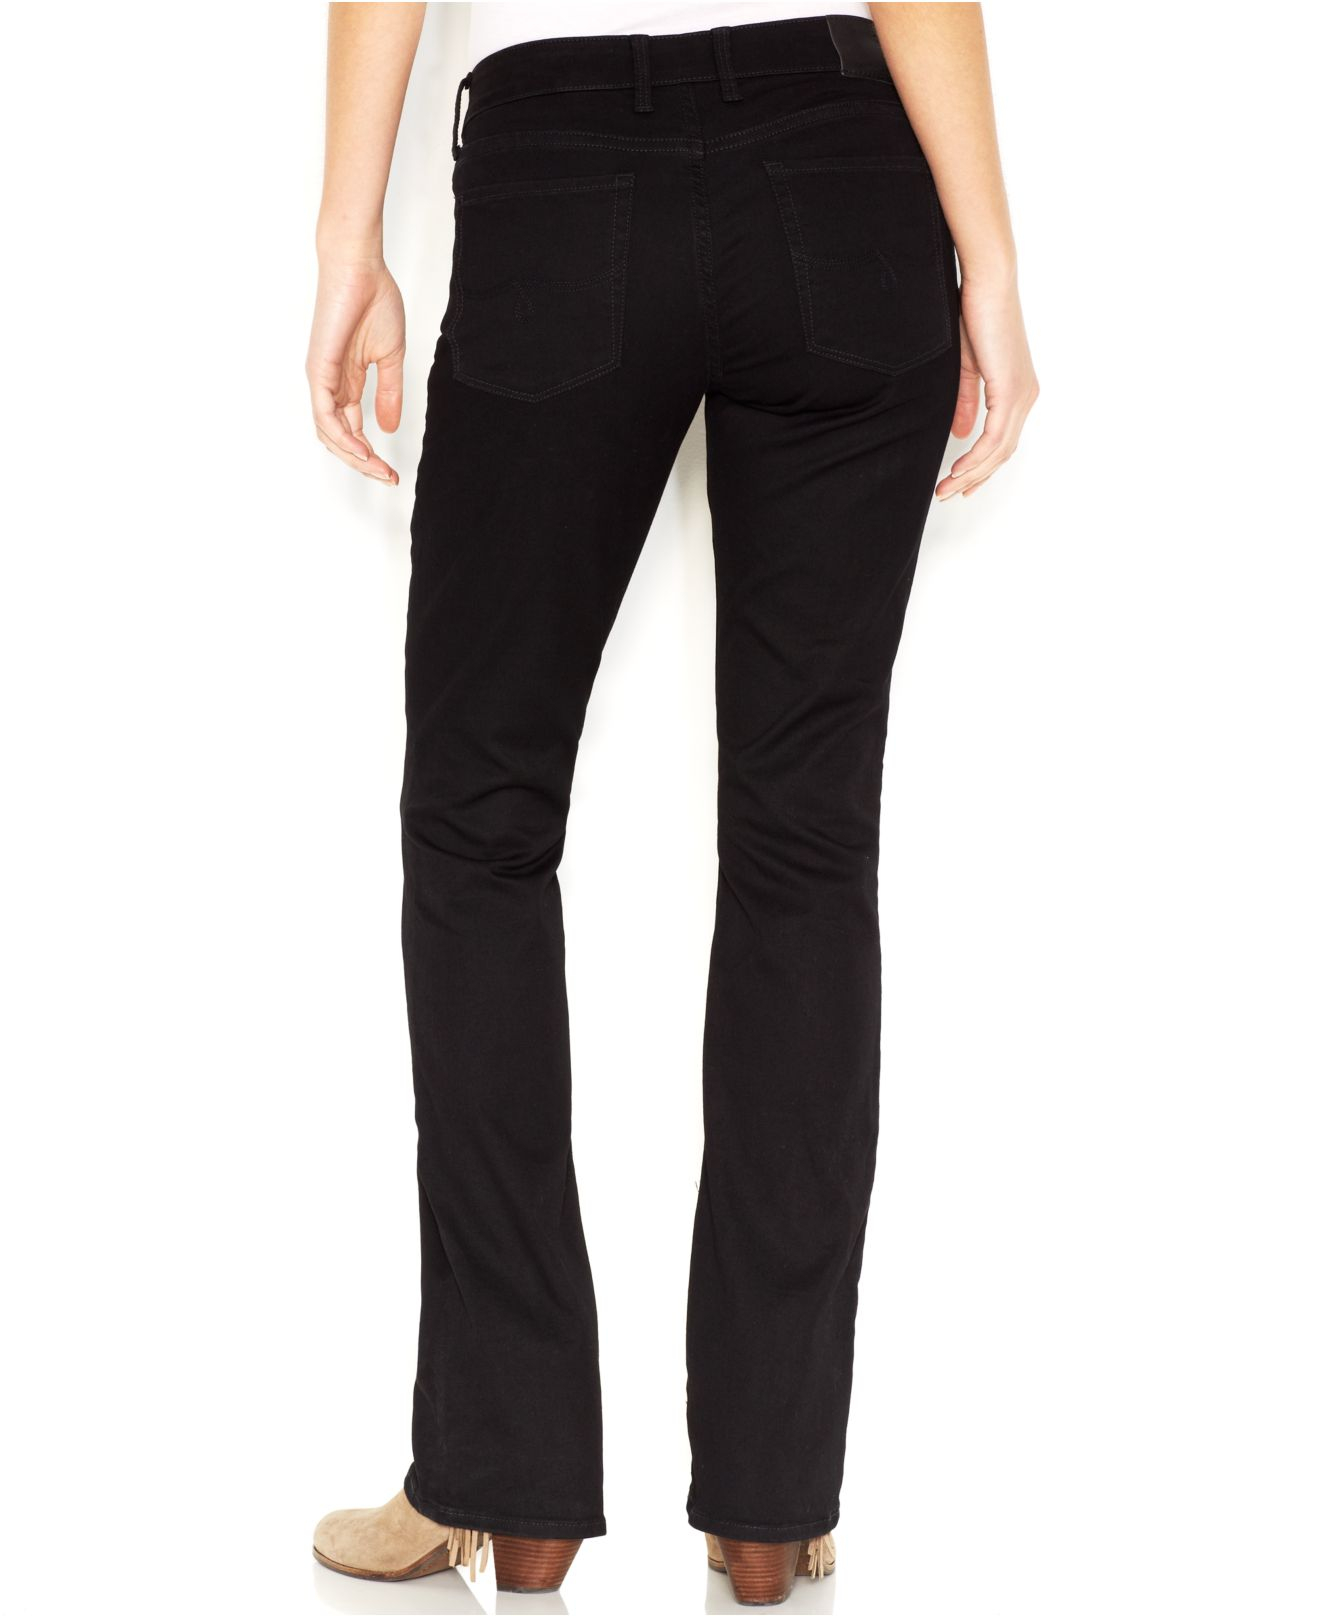 Lucky brand Lolita Bootcut Jeans, Black Amber Wash in Black | Lyst